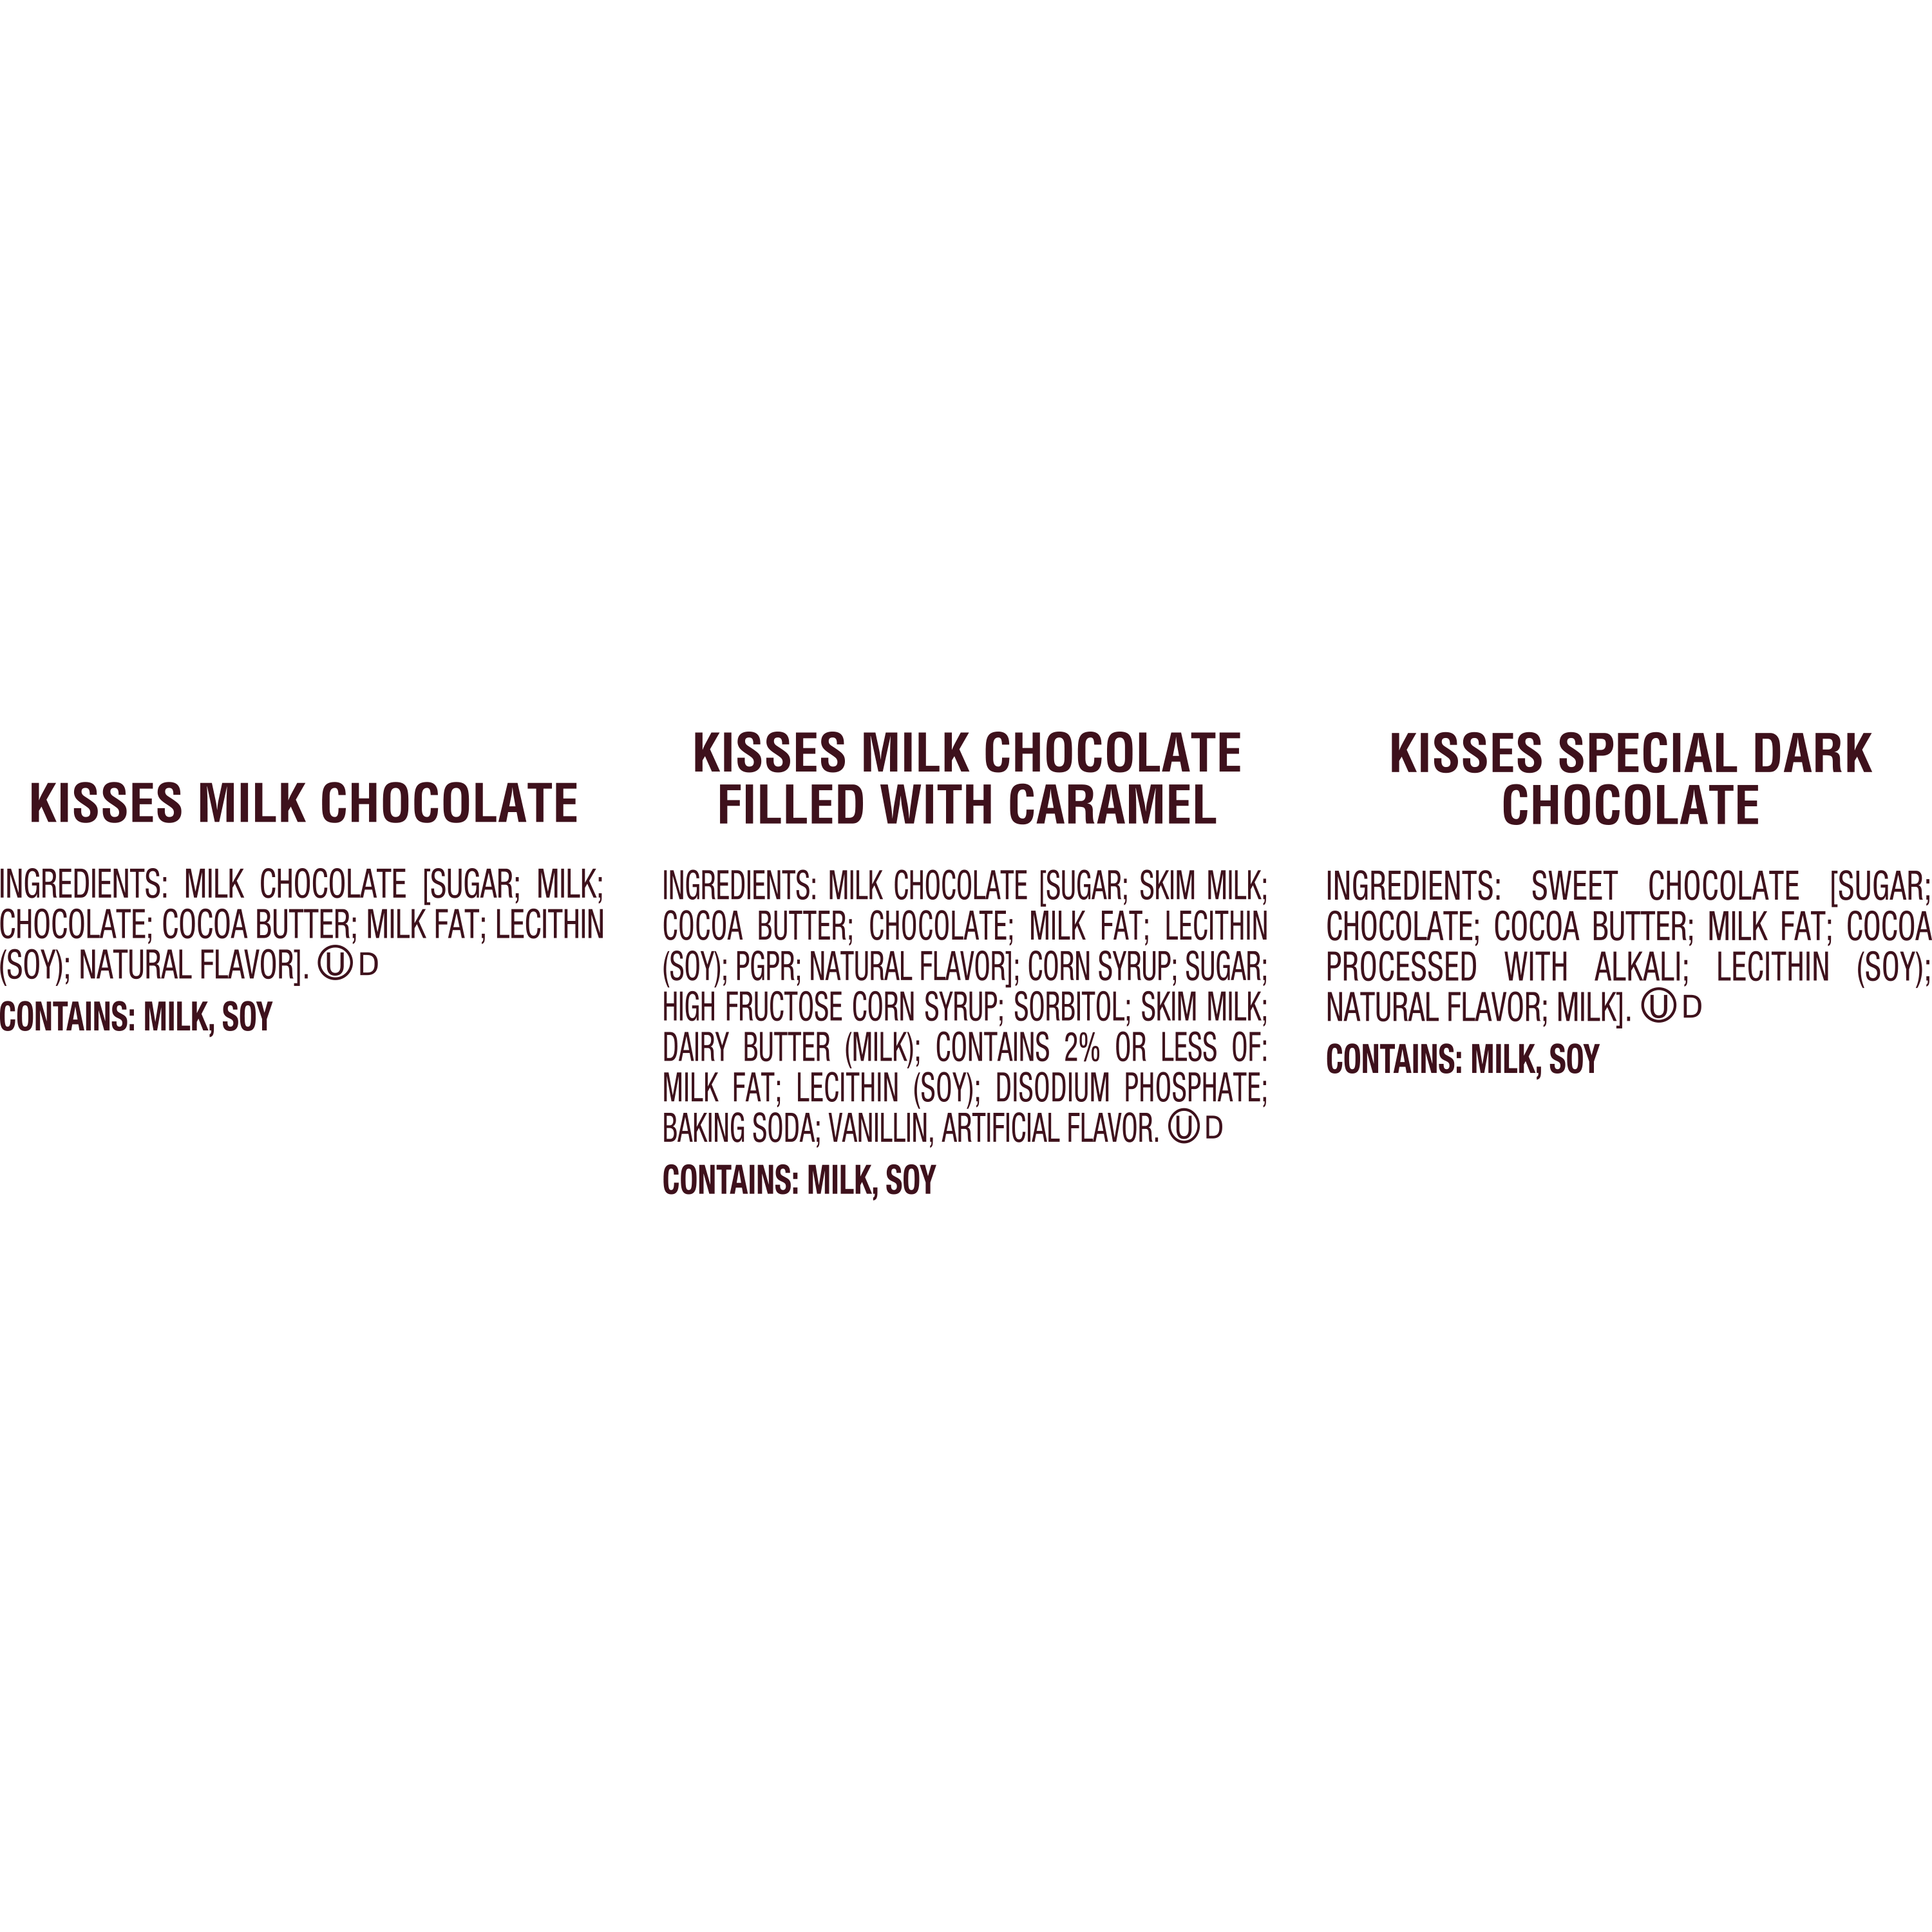 HERSHEY'S KISSES Snack Size Assortment, 31.5 oz pack - Ingredients